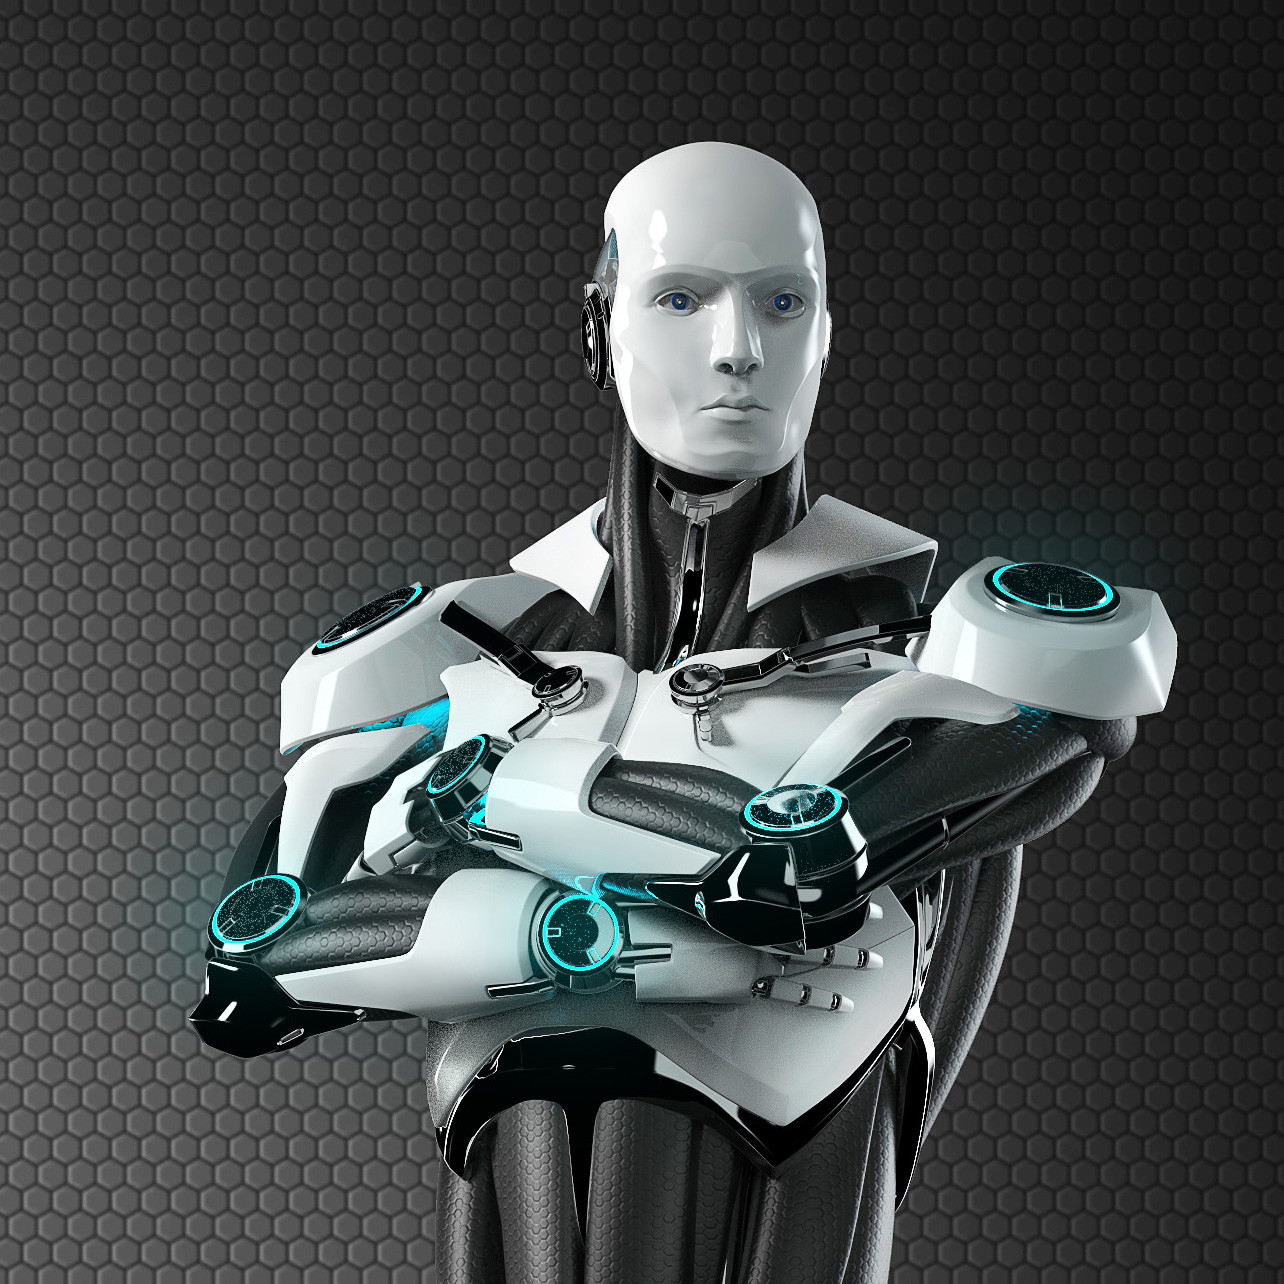 ArtStation - Android Robot / 3d model | Resources